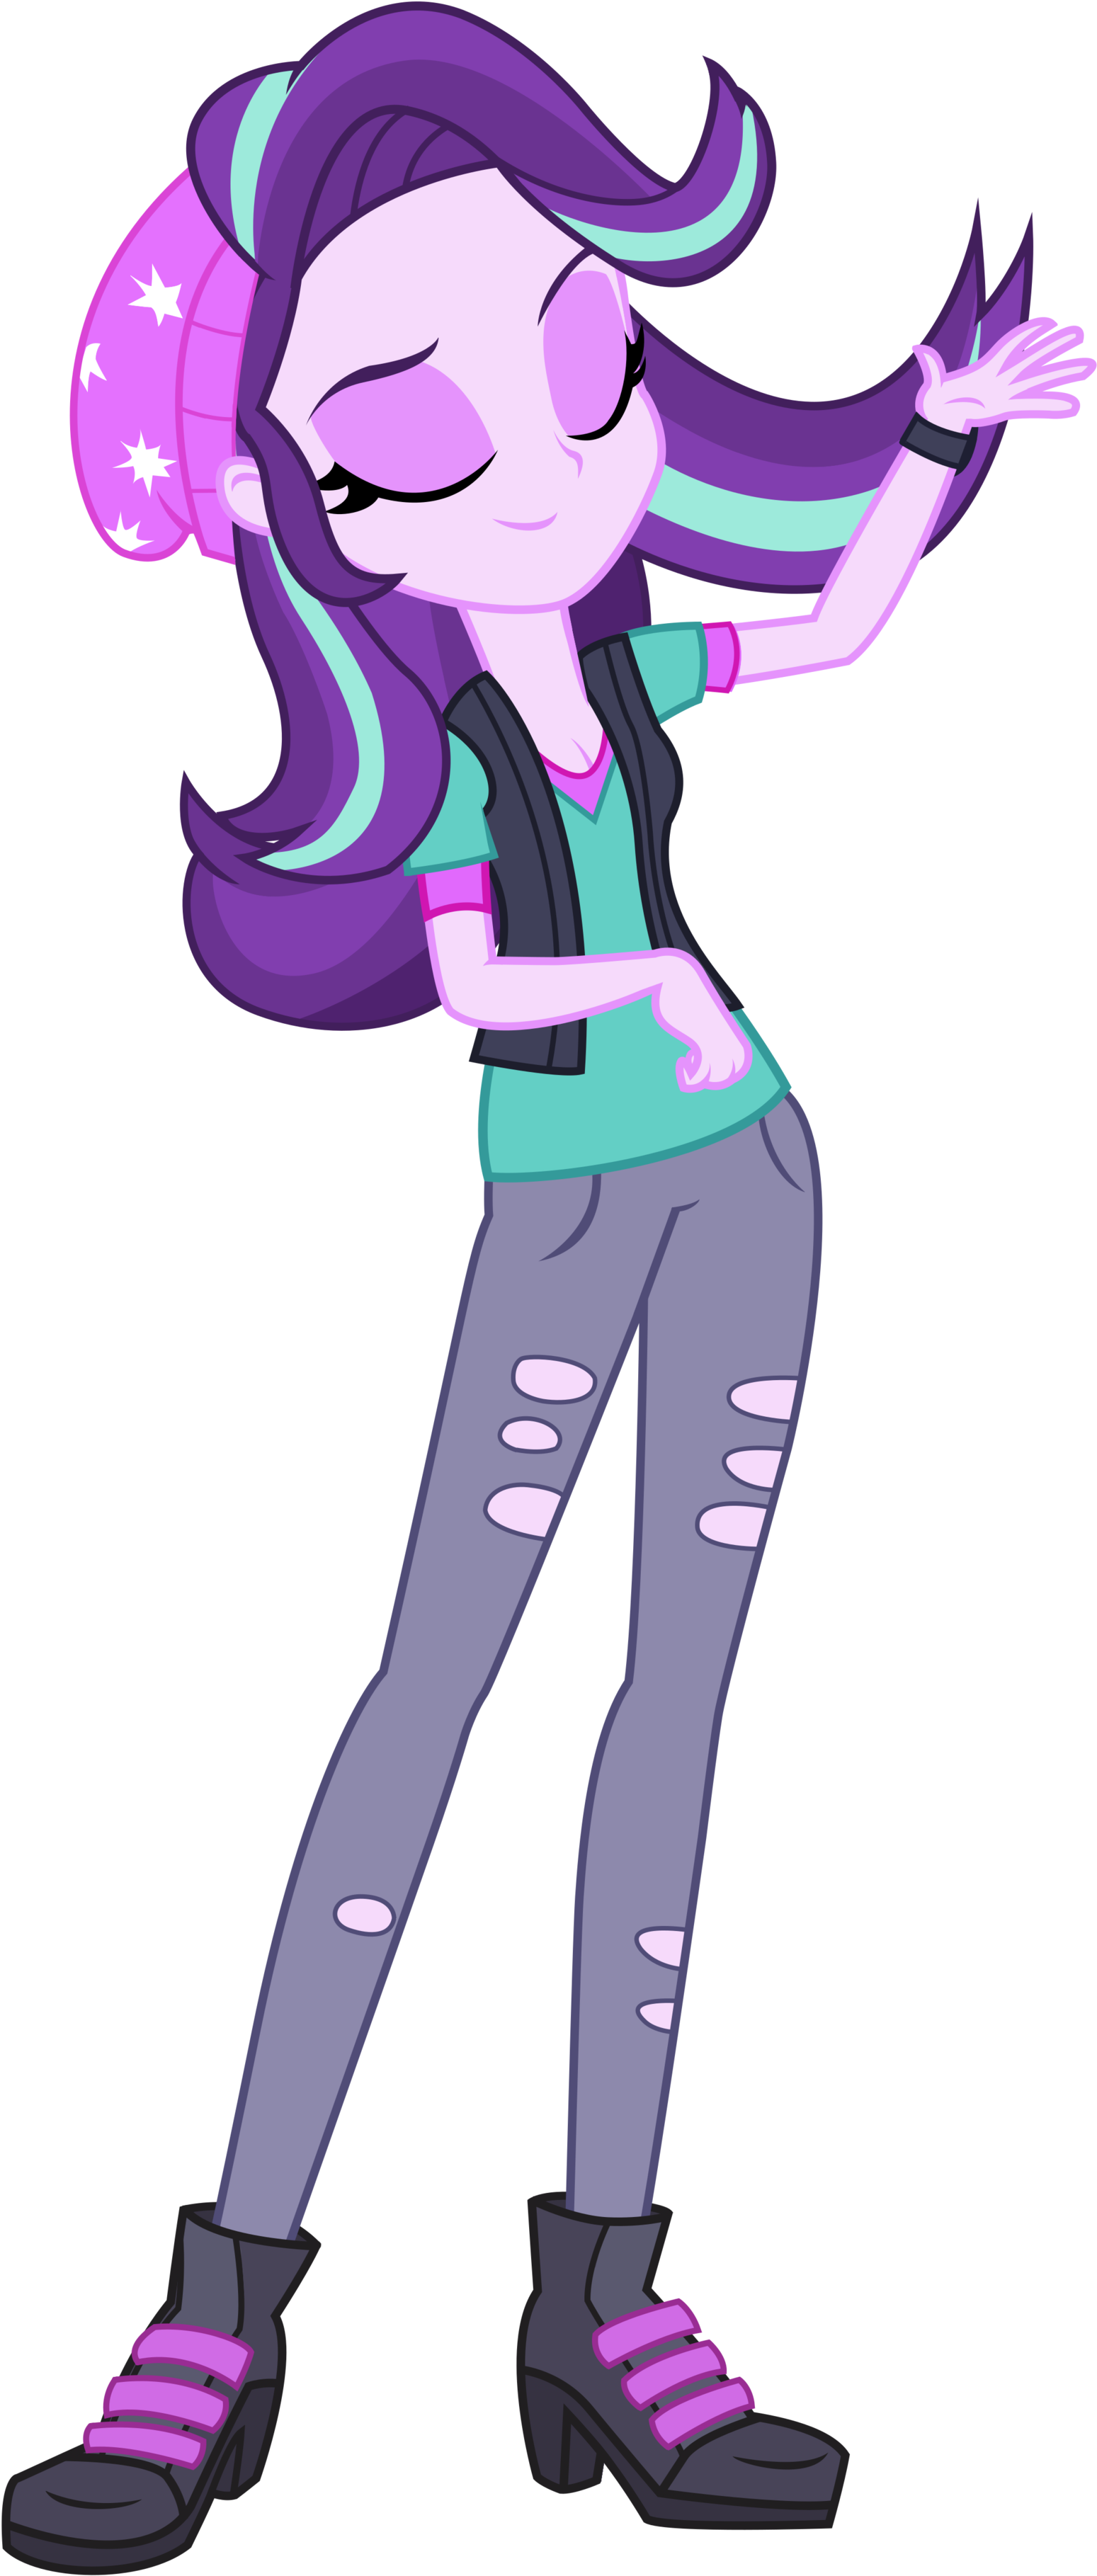 From Equestria Girls Special "mirror Magic" Starlight - My Little Pony Equestria Girls Twilight Sparkle (1600x3731)